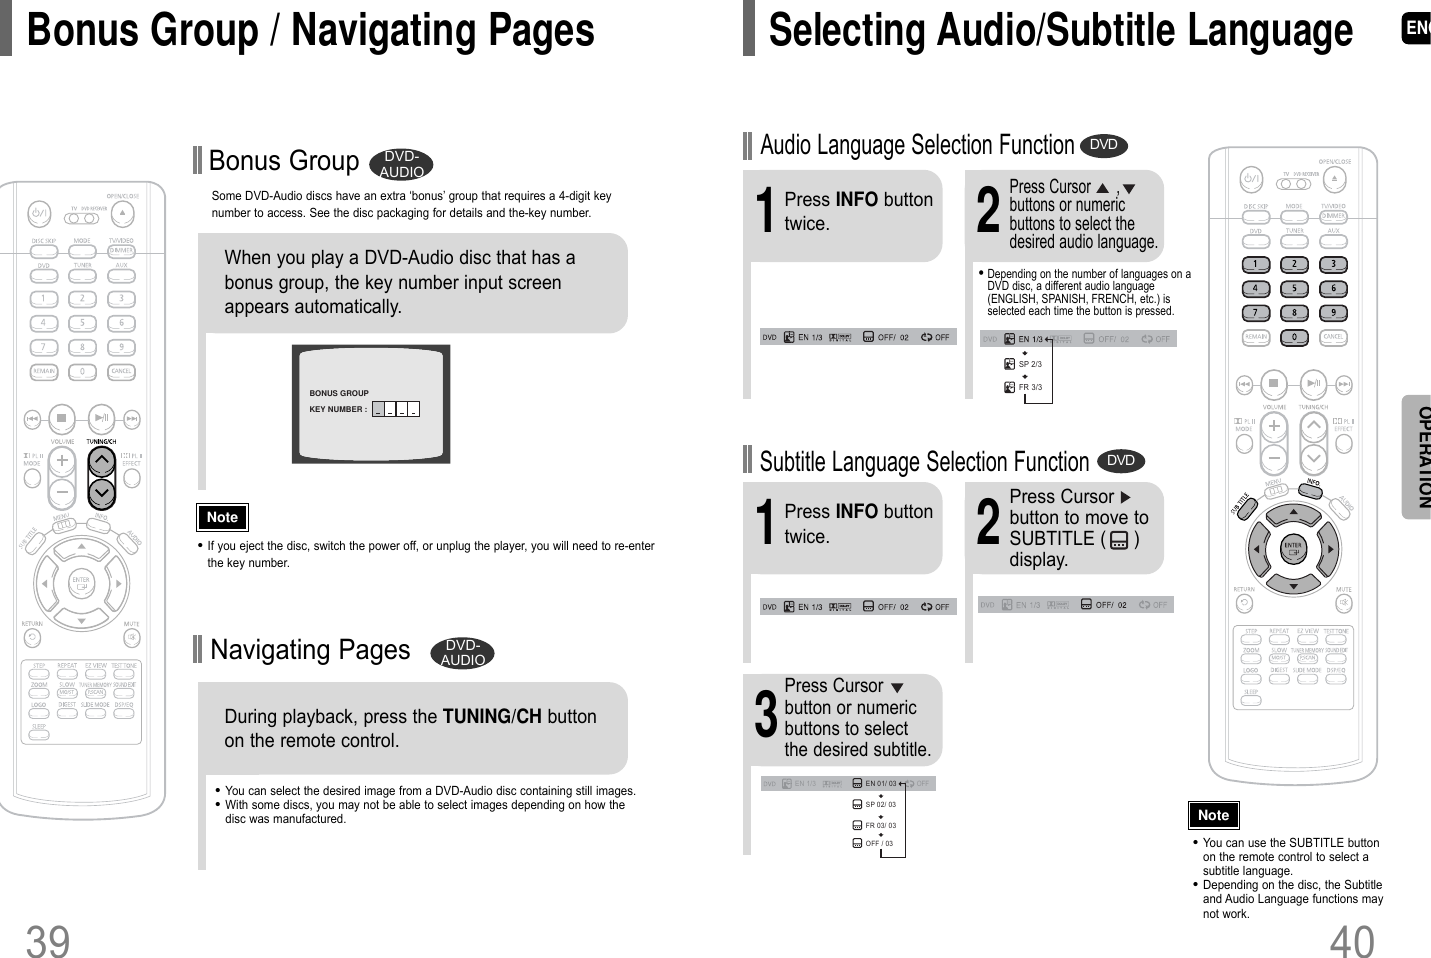 ENGSome DVD-Audio discs have an extra ‘bonus’ group that requires a 4-digit keynumber to access. See the disc packaging for details and the-key number.Bonus GroupWhen you play a DVD-Audio disc that has abonus group, the key number input screenappears automatically. •You can select the desired image from a DVD-Audio disc containing still images.•With some discs, you may not be able to select images depending on how thedisc was manufactured.•If you eject the disc, switch the power off, or unplug the player, you will need to re-enterthe key number.NoteDVD-AUDIOBONUS GROUPKEY NUMBER : Navigating PagesDuring playback, press the TUNING/CH buttonon the remote control. DVD-AUDIOBonus Group / Navigating Pages4039OPERATION•Depending on the number of languages on aDVD disc, a different audio language(ENGLISH, SPANISH, FRENCH, etc.) isselected each time the button is pressed. 2Press Cursor      ,buttons or numericbuttons to select thedesired audio language.1Press INFO buttontwice.SP 2/3FR 3/3EN 1/3 EN 01/ 03OFFSP 02/ 03FR 03/ 03OFF / 03•You can use the SUBTITLE buttonon the remote control to select asubtitle language.•Depending on the disc, the Subtitleand Audio Language functions maynot work.Audio Language Selection FunctionDVDSubtitle Language Selection FunctionDVD2Press Cursorbutton to move toSUBTITLE (     )display.1Press INFO buttontwice.3Press Cursorbutton or numericbuttons to selectthe desired subtitle.NoteSelecting Audio/Subtitle Language